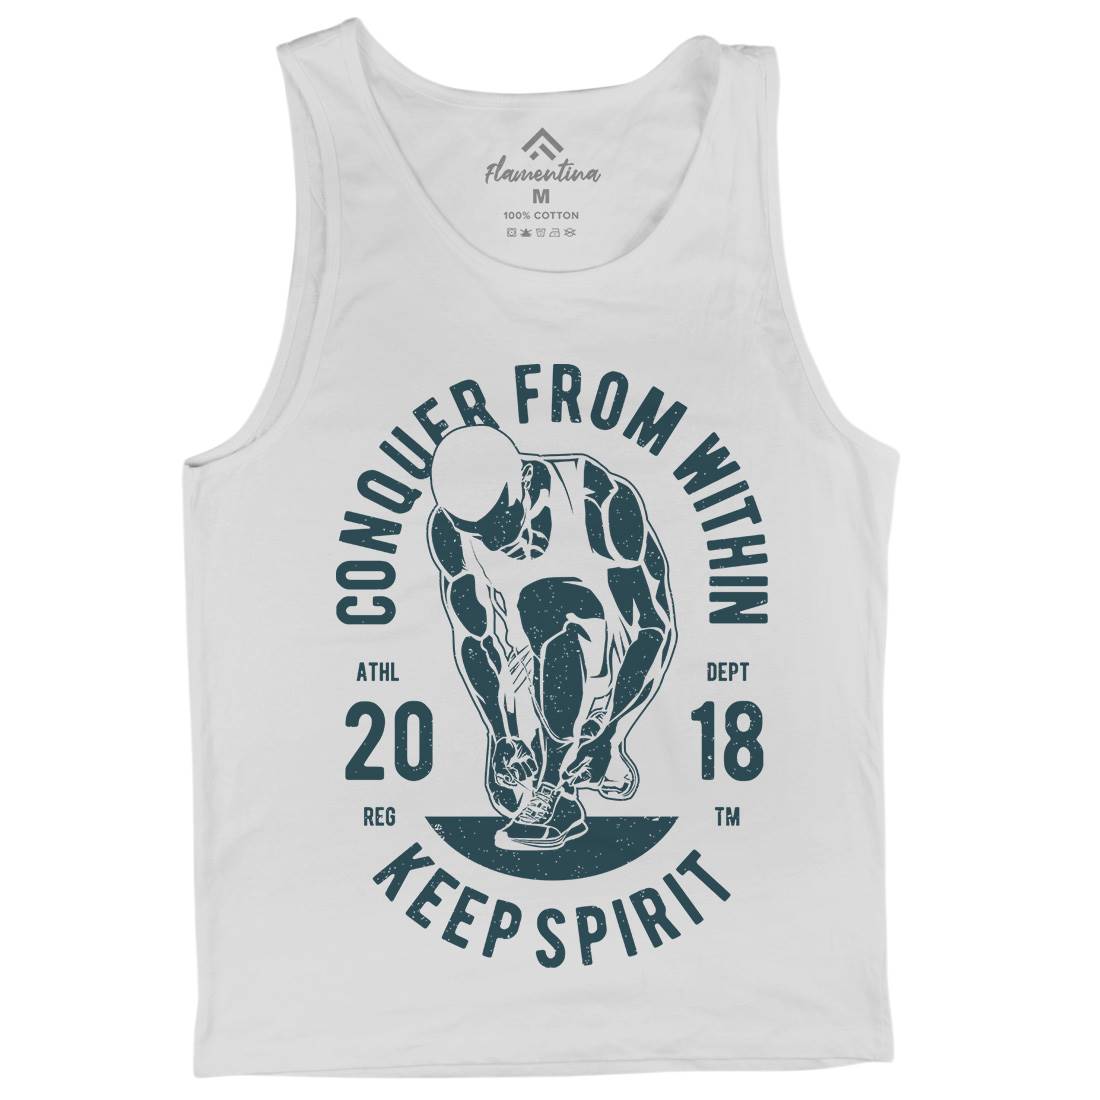 Conquer From Within Mens Tank Top Vest Sport A638